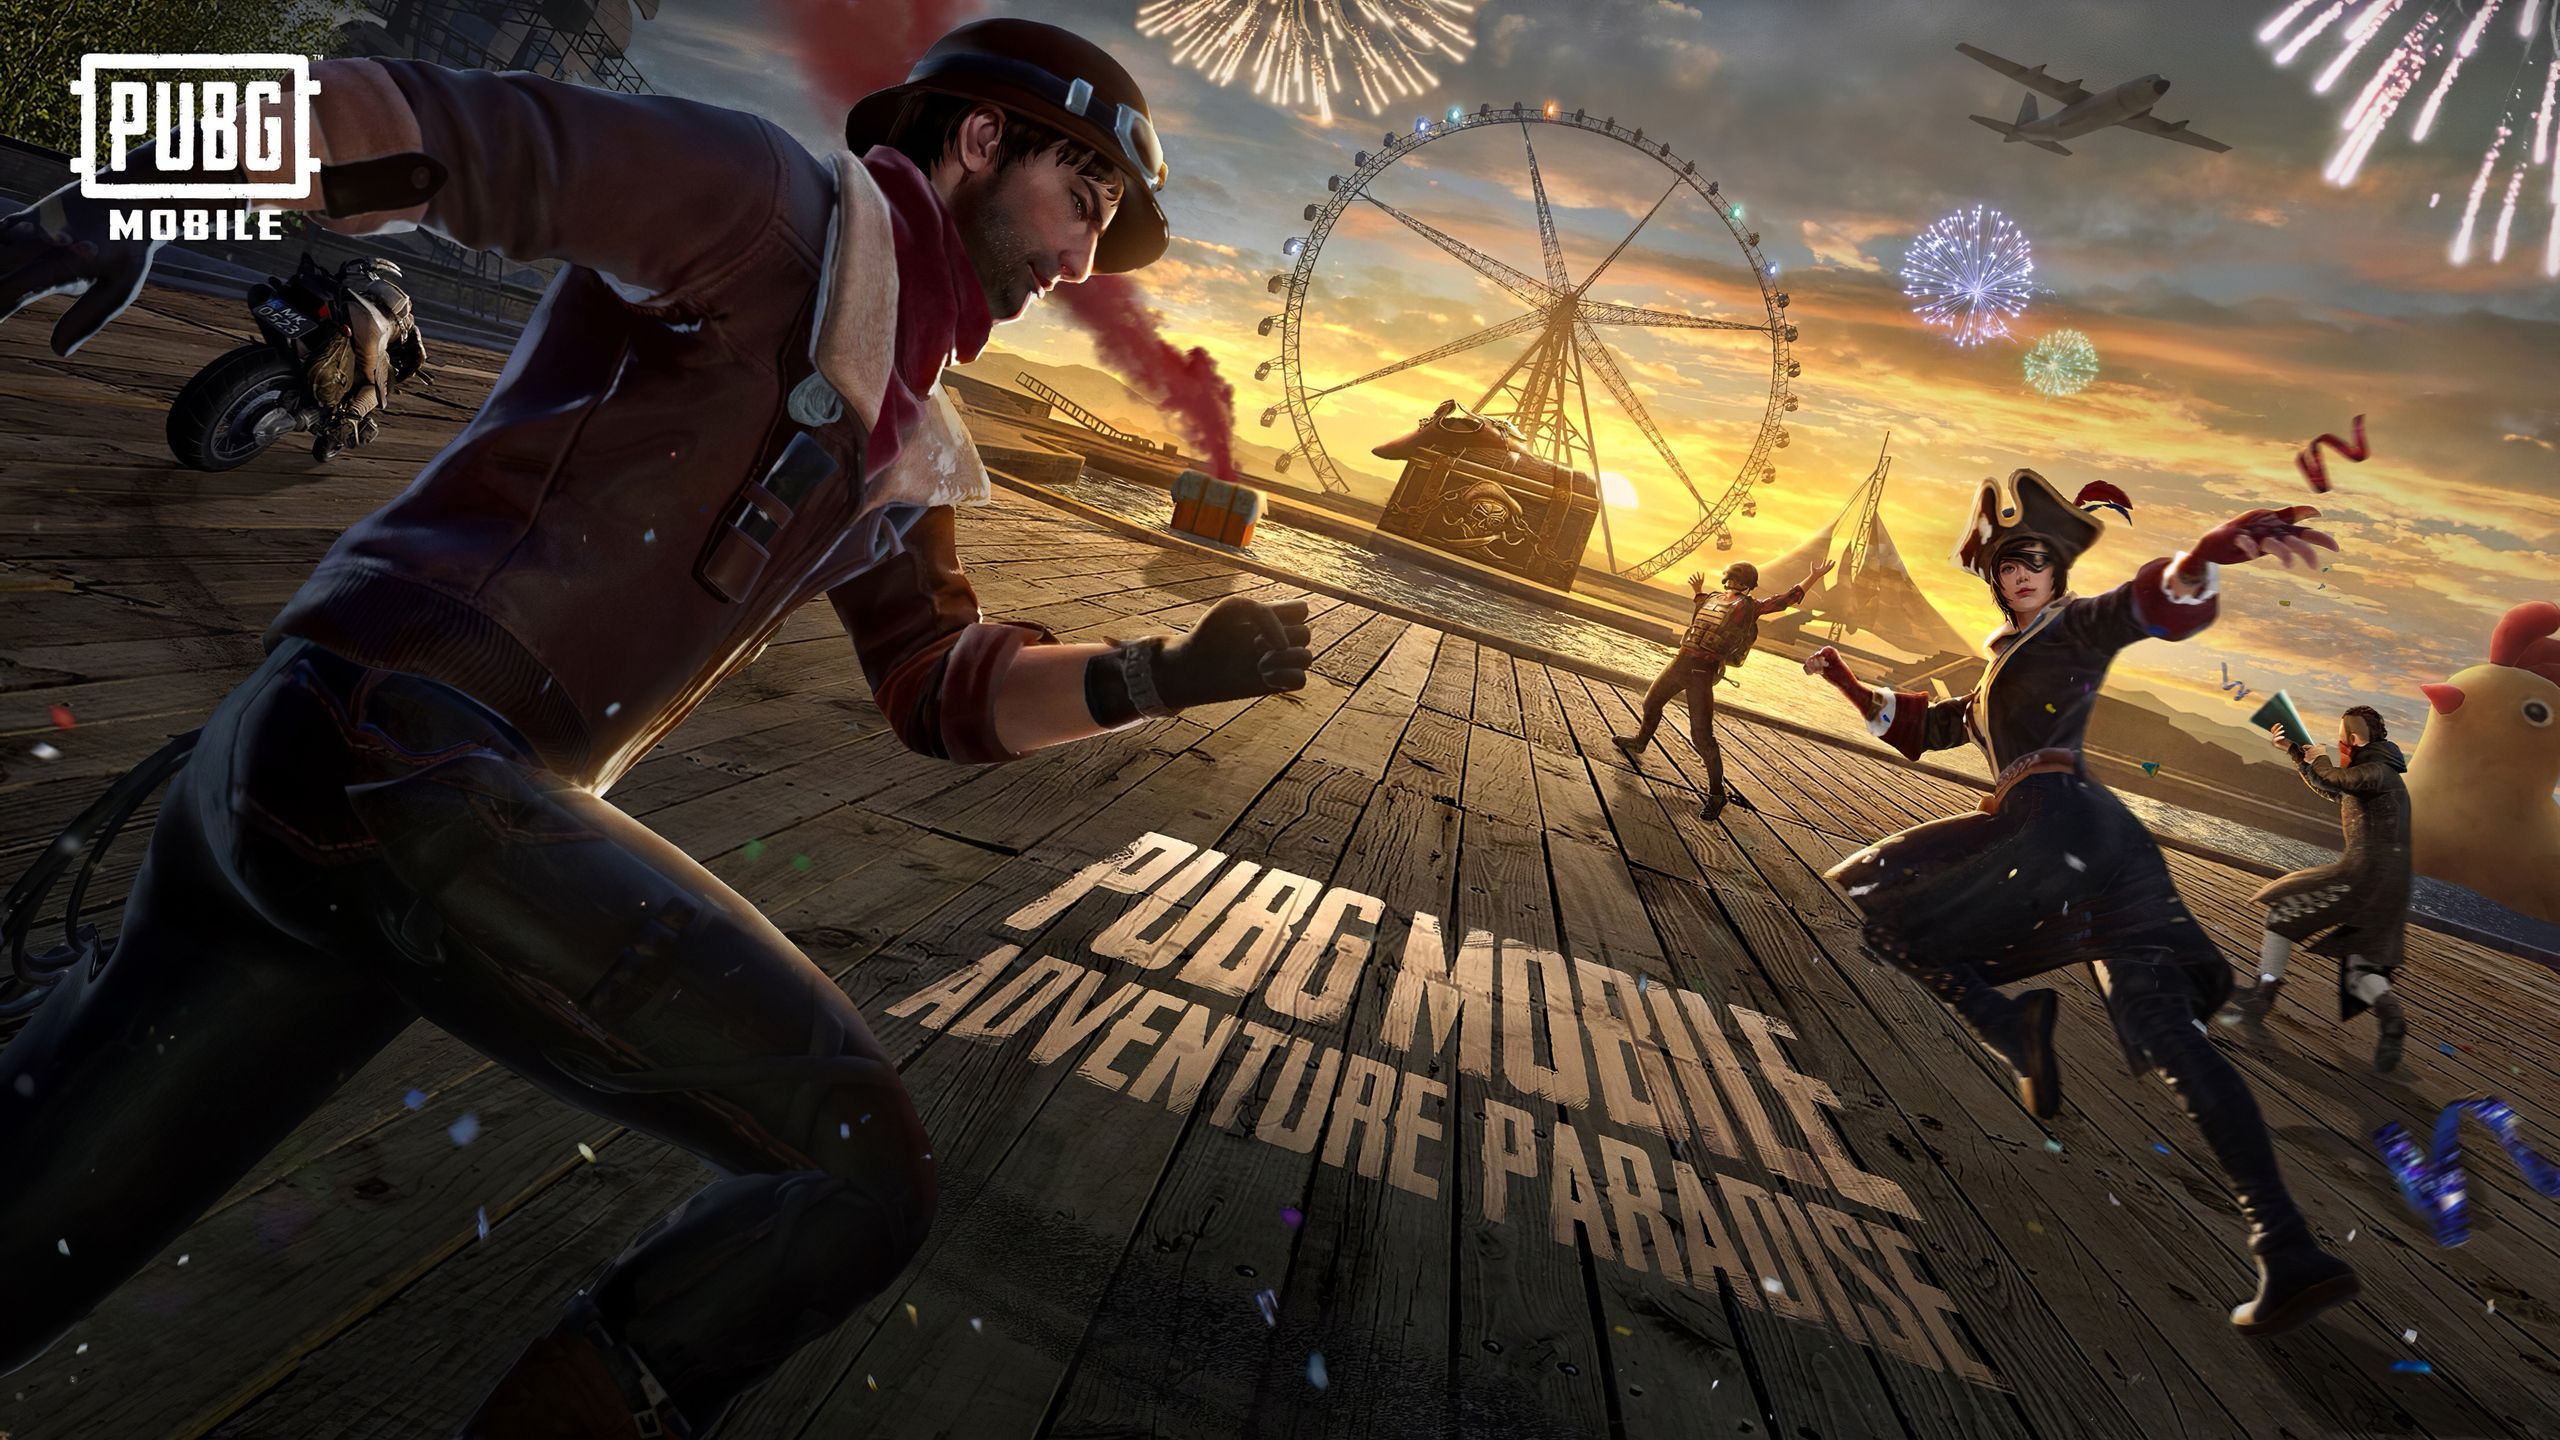 Pubg Mobile Adventure Paradise 4k 1440P Resolution HD 4k Wallpaper, Image, Background, Photo and Picture